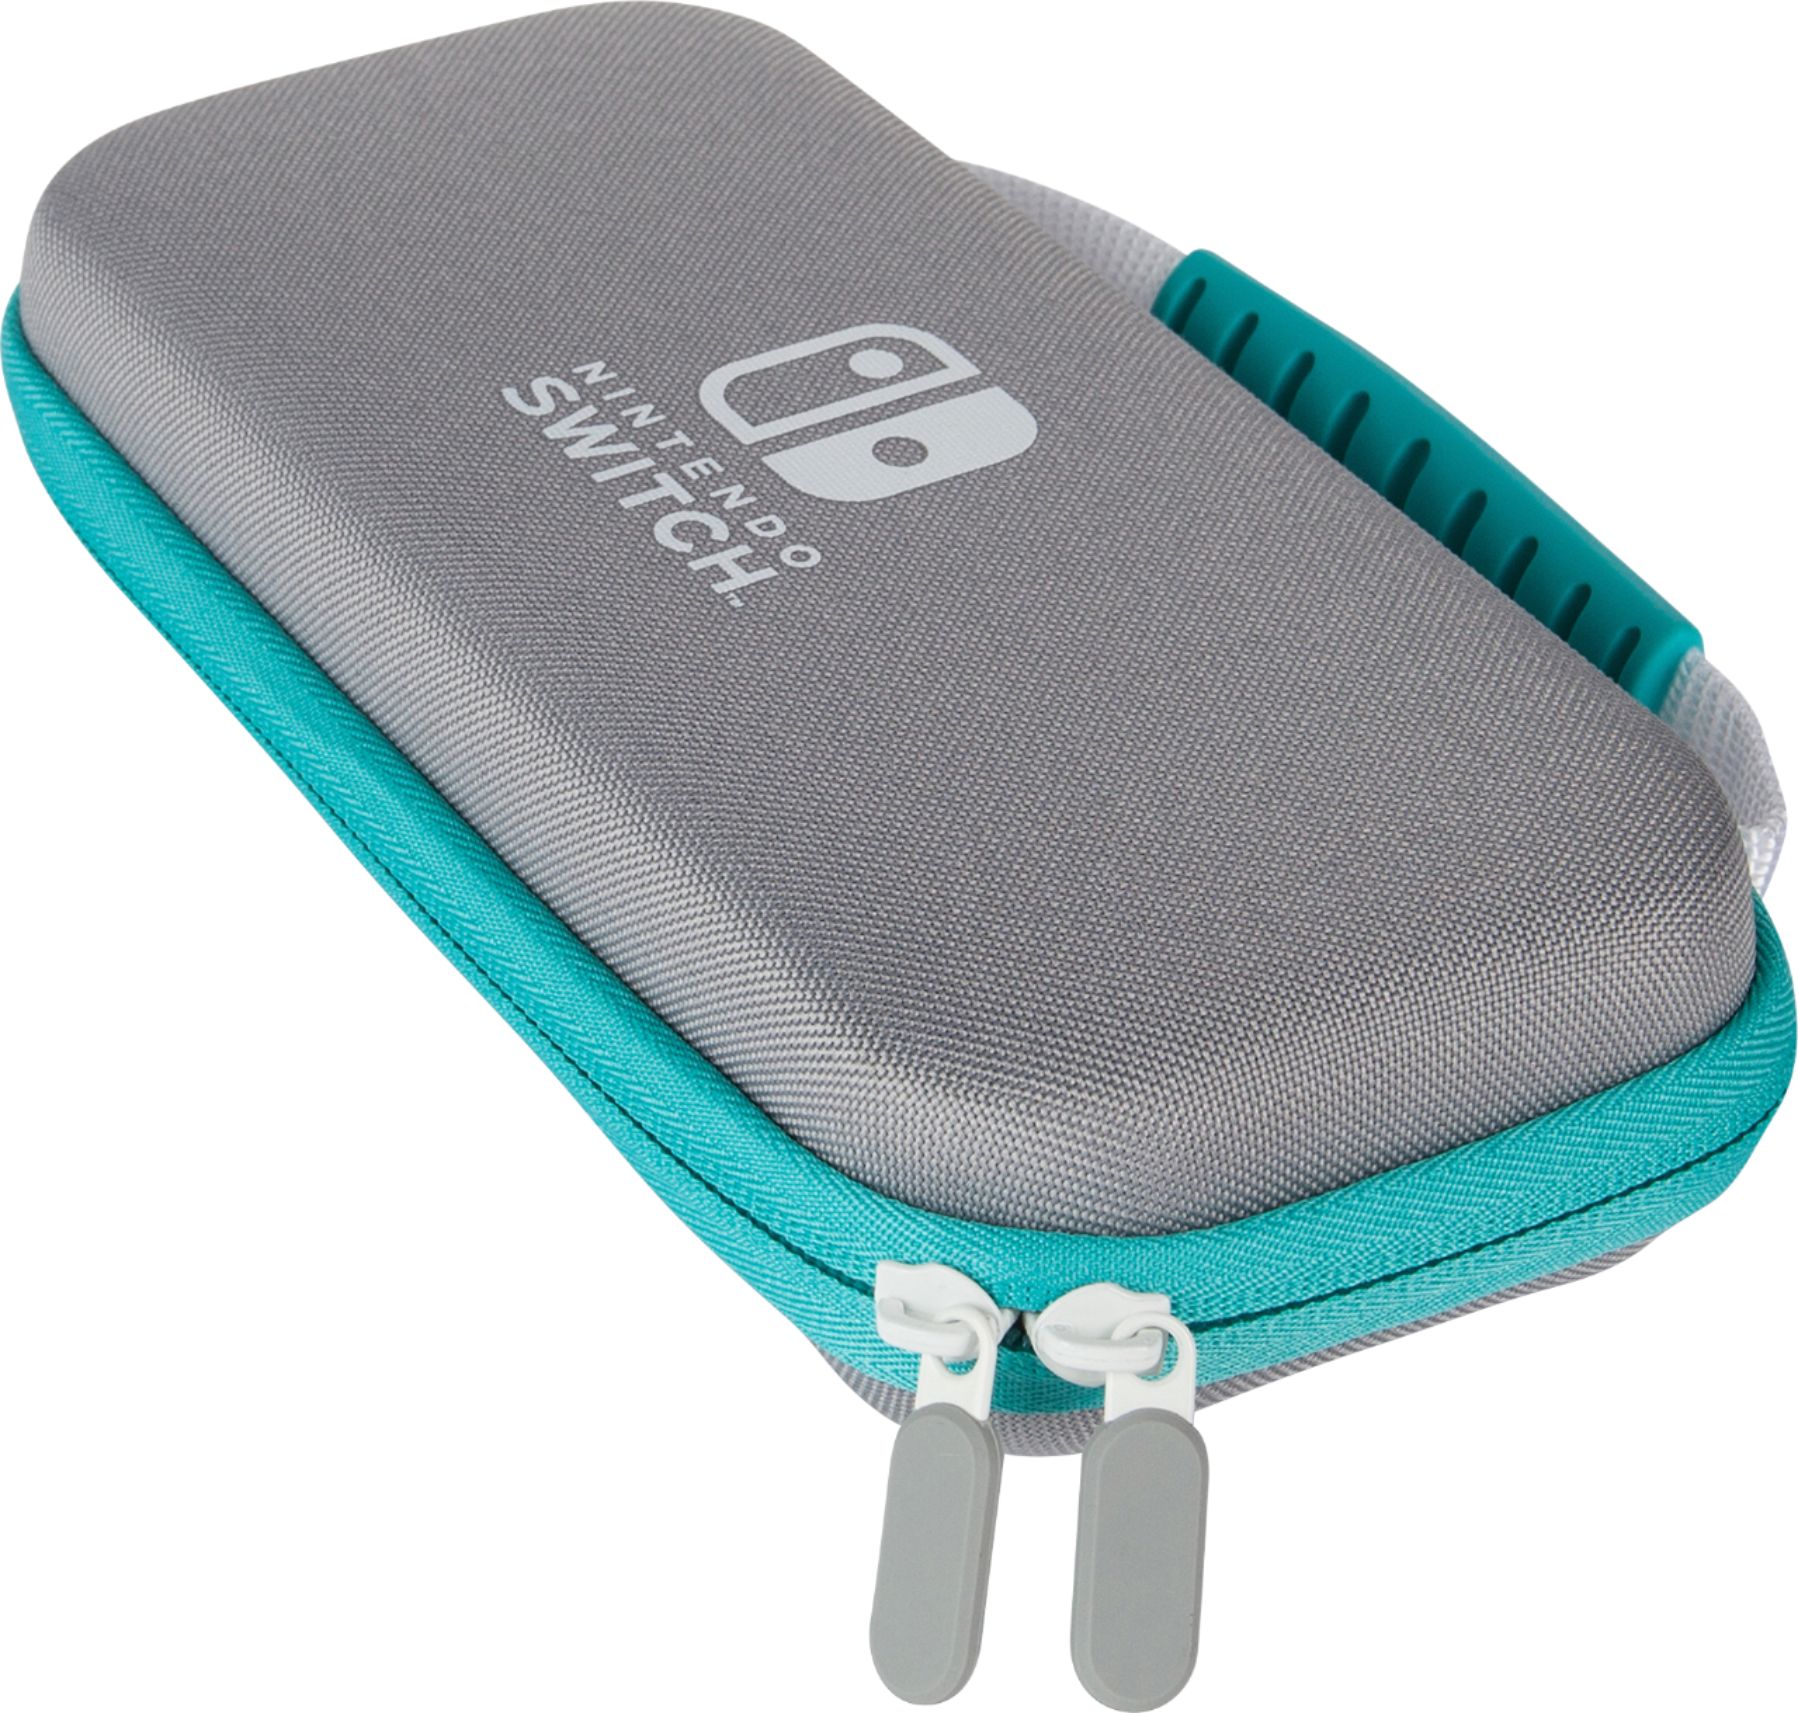 Back View: PowerA Protection Case Kit for Nintendo Switch Lite - Turquoise